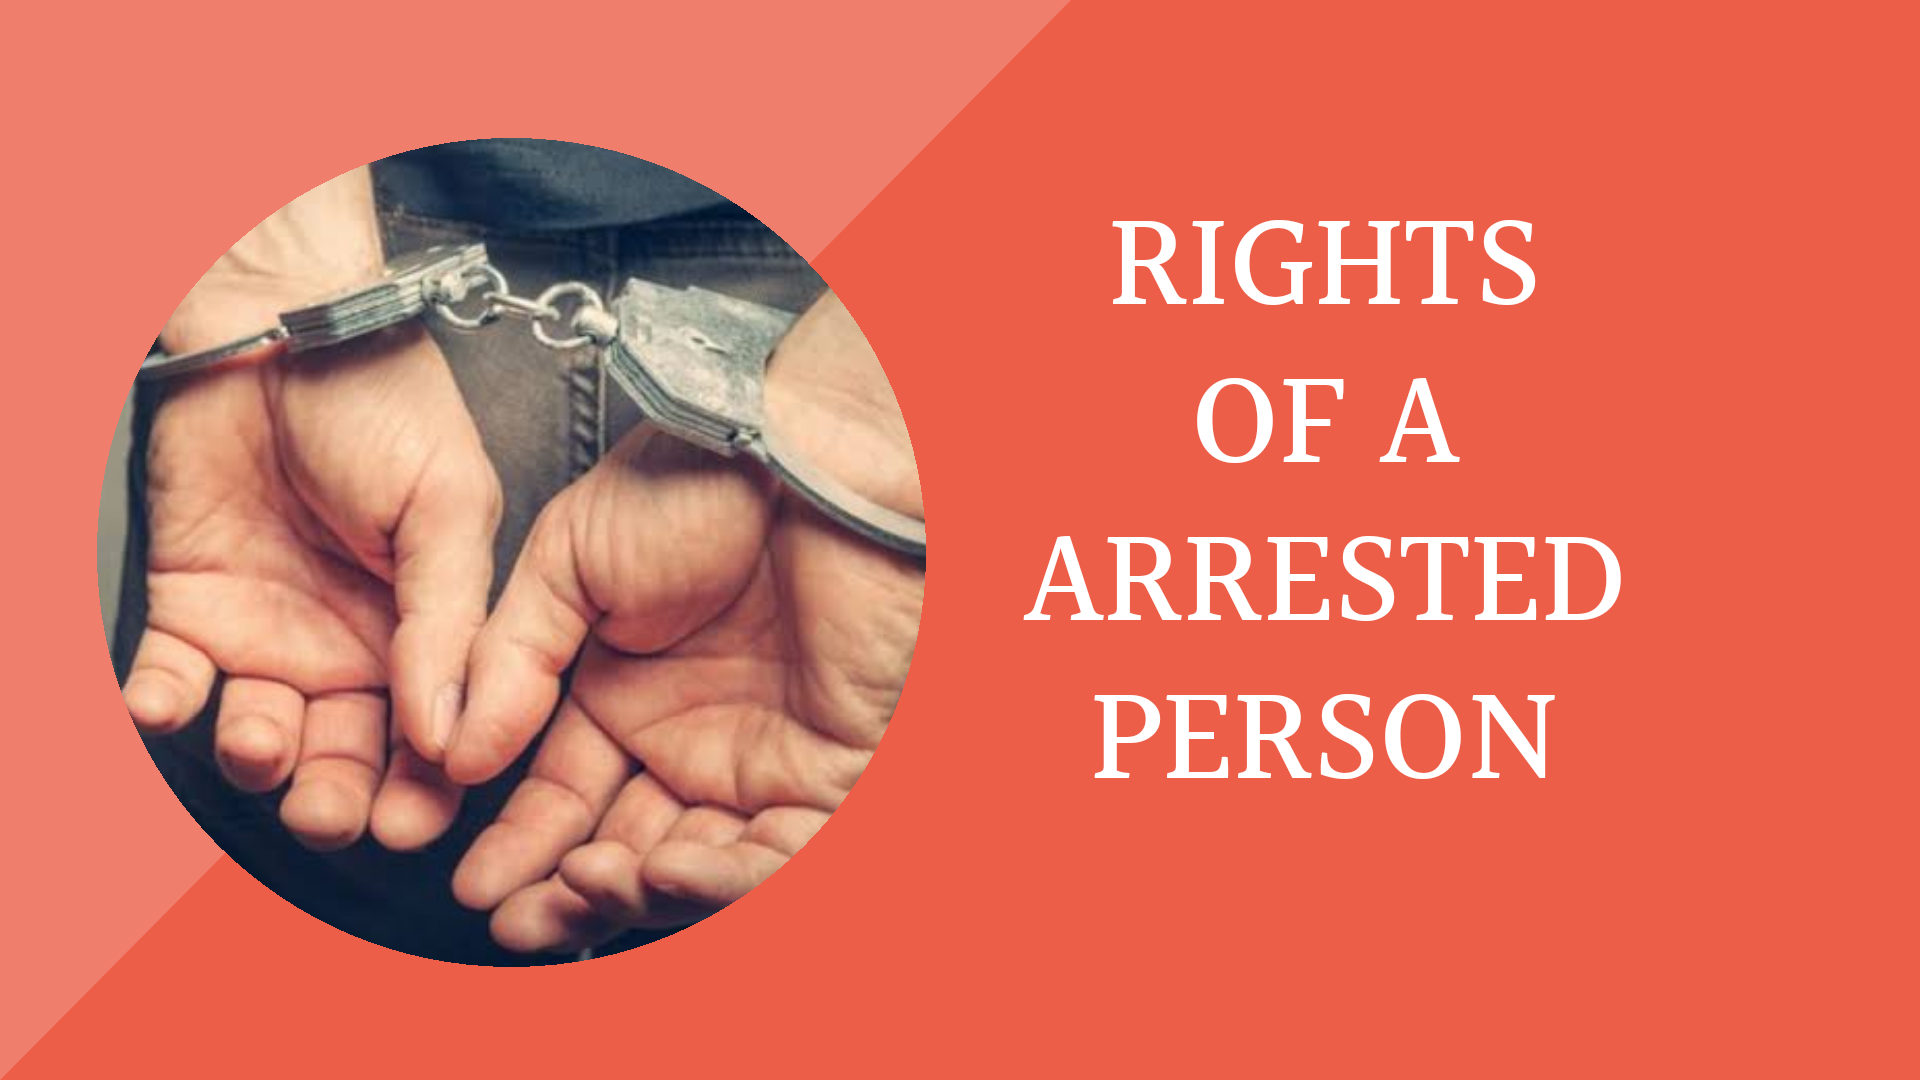 Rights of a arrested person